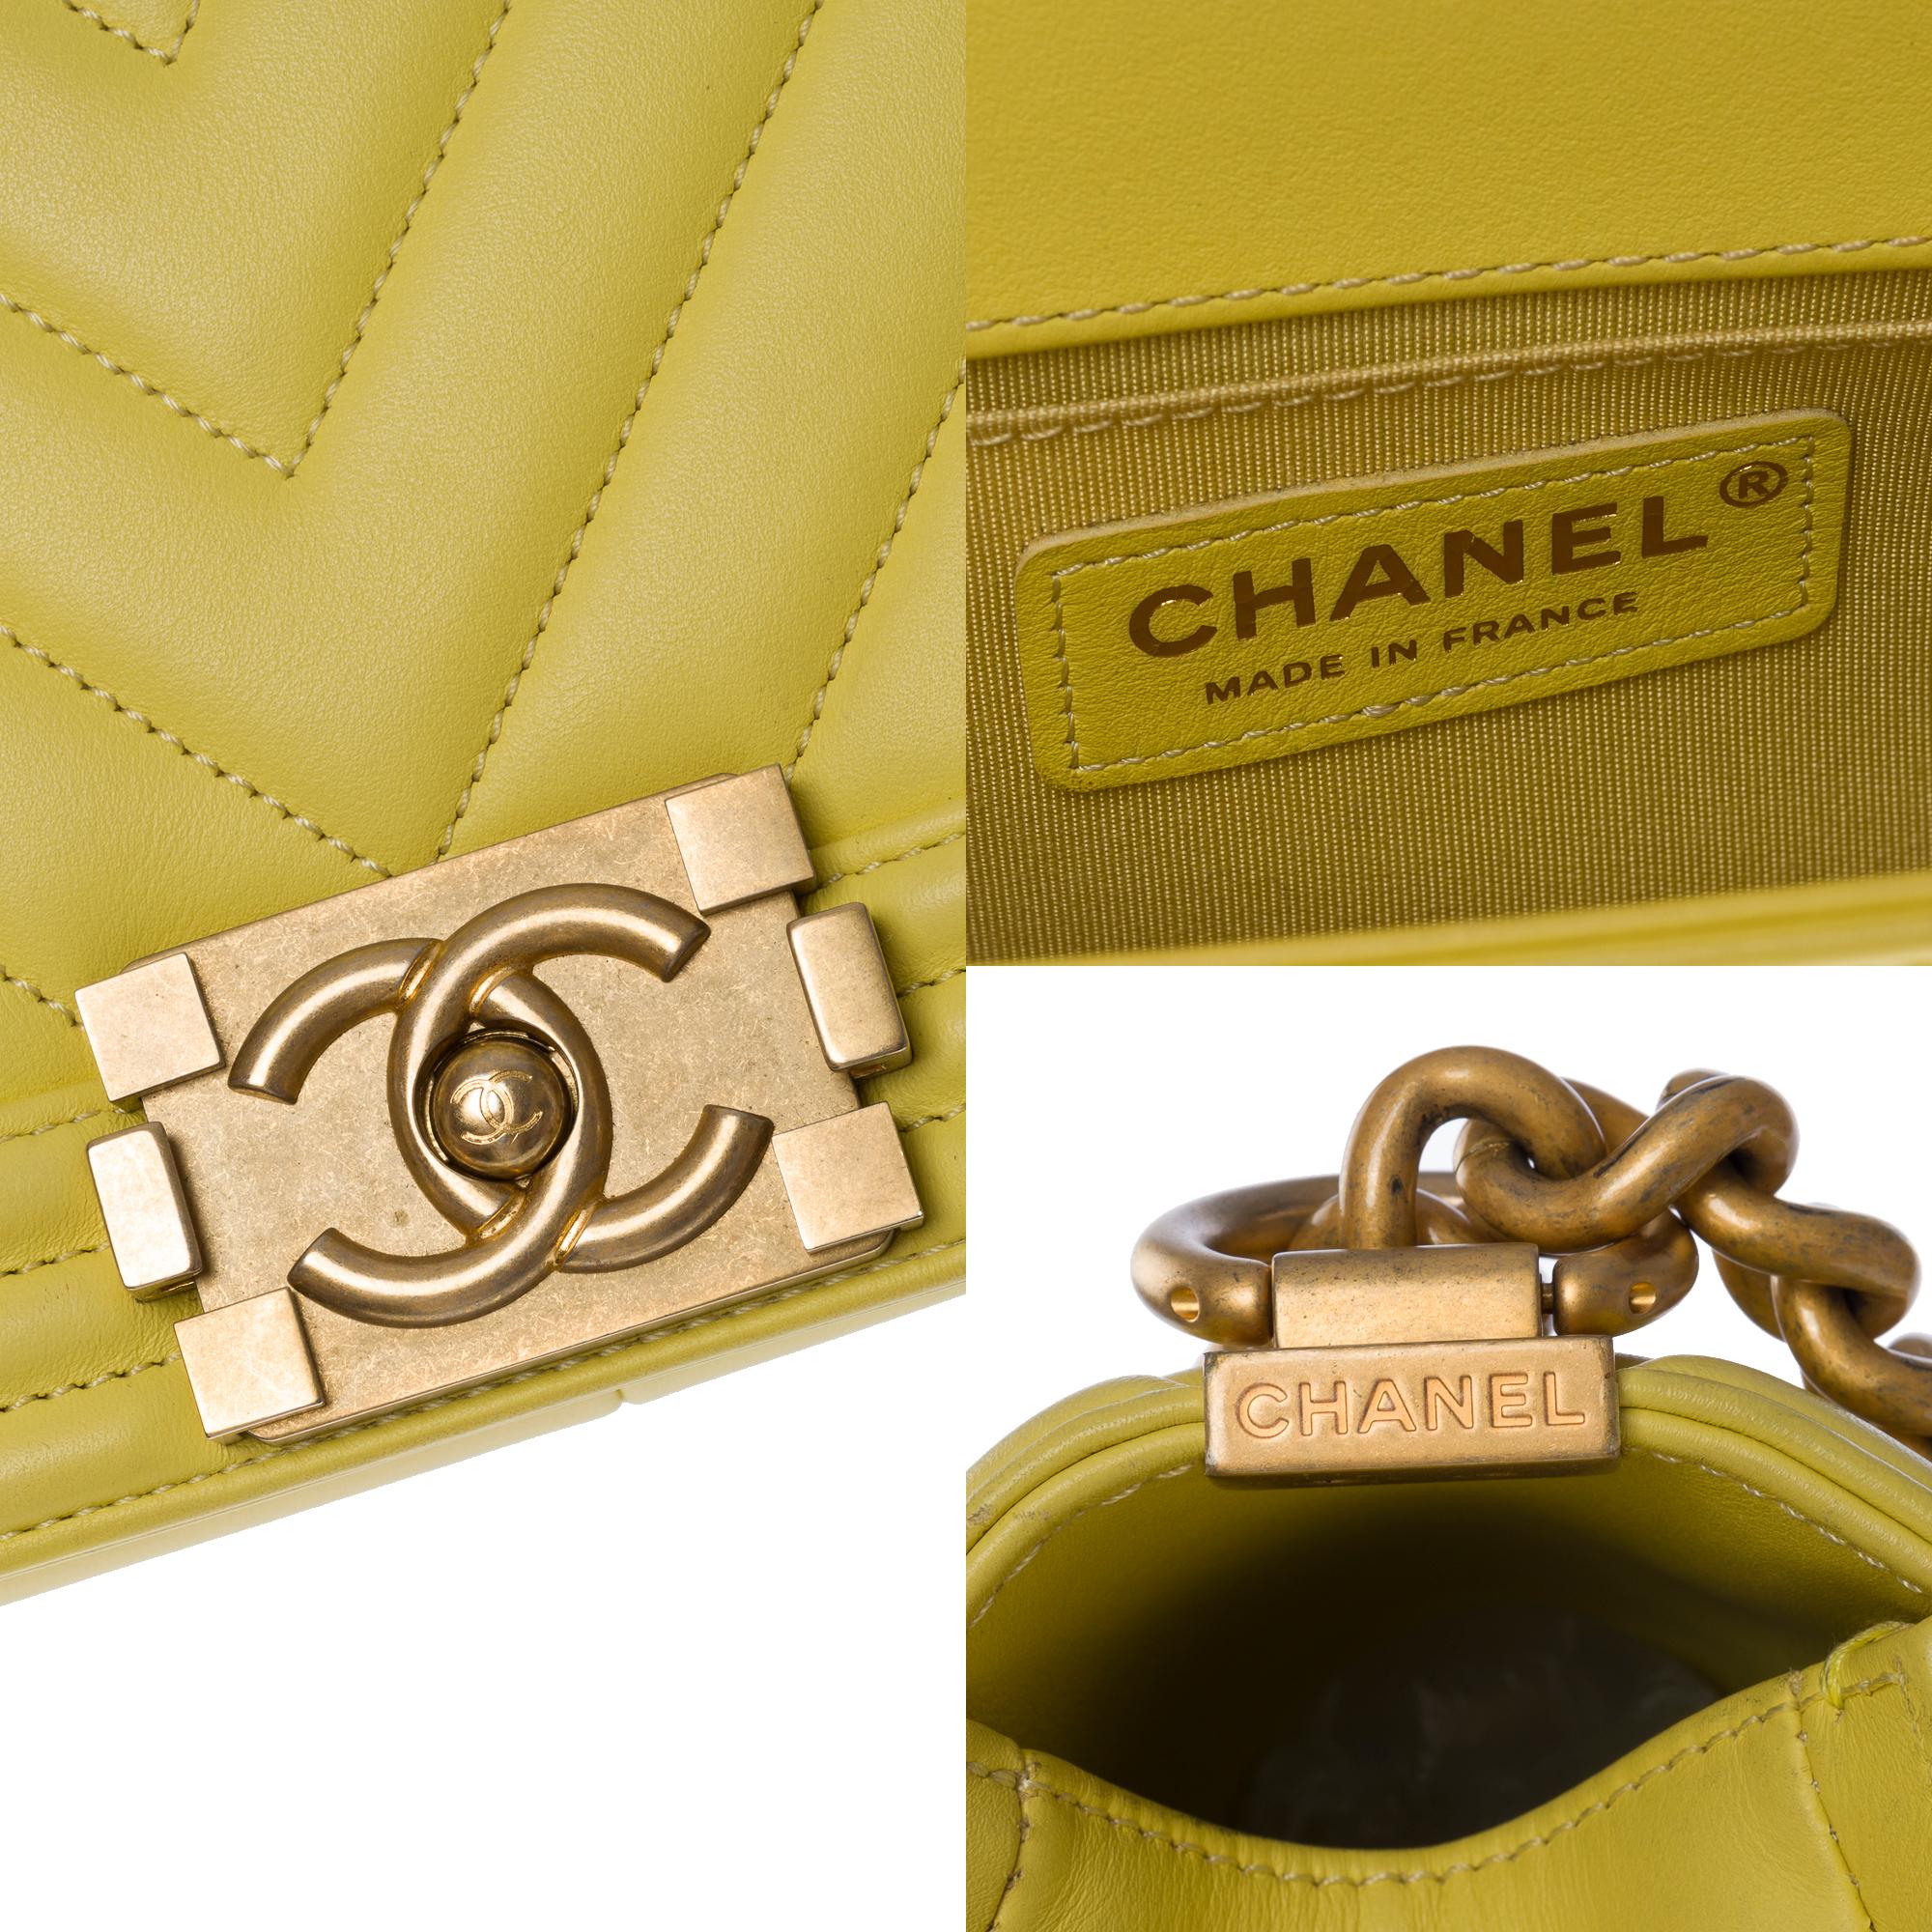 Chanel Boy Old Medium shoulder bag in Yellow quilted herringbone leather, MGHW For Sale 2